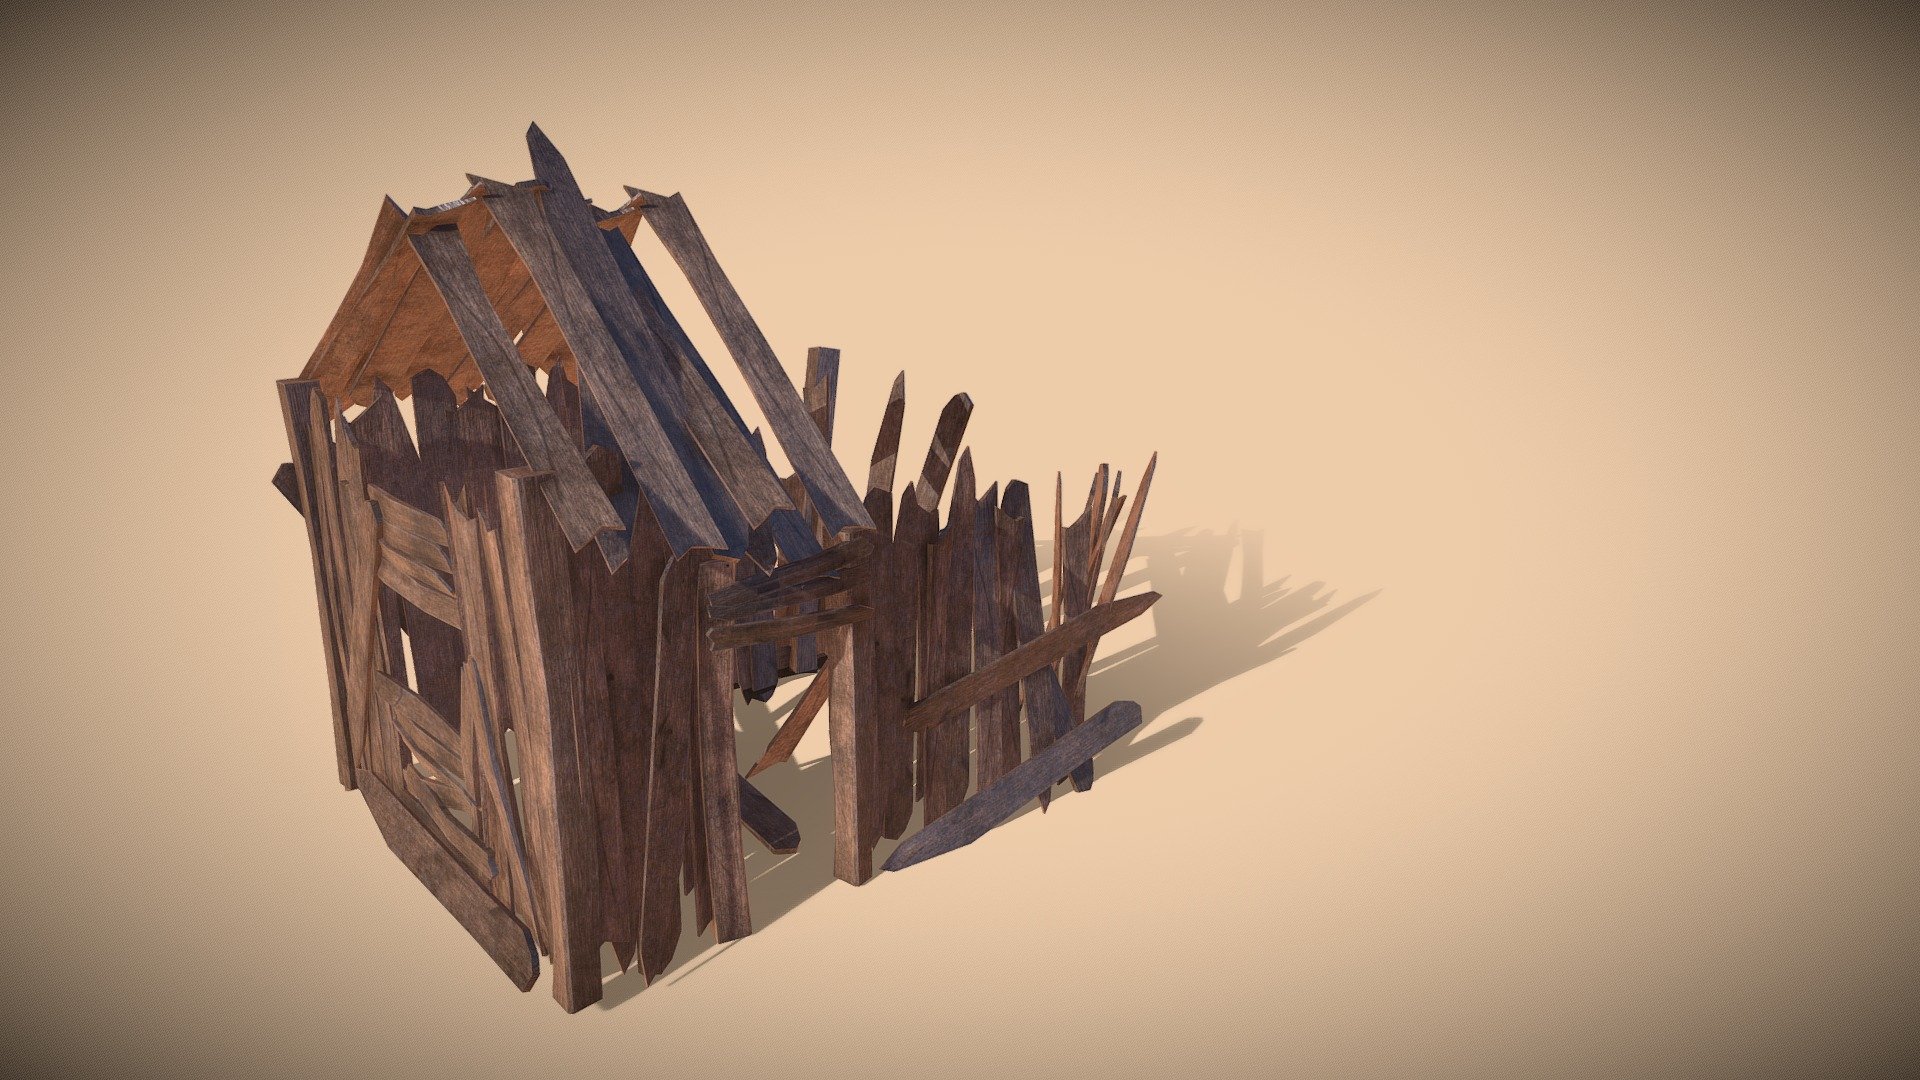 Broken down house.
Modeled in Maya;
Game-ready (optimized) for Unity, Unreal Engine, etc.
Perfect for different games based in the medieval ages, even current age 3d model